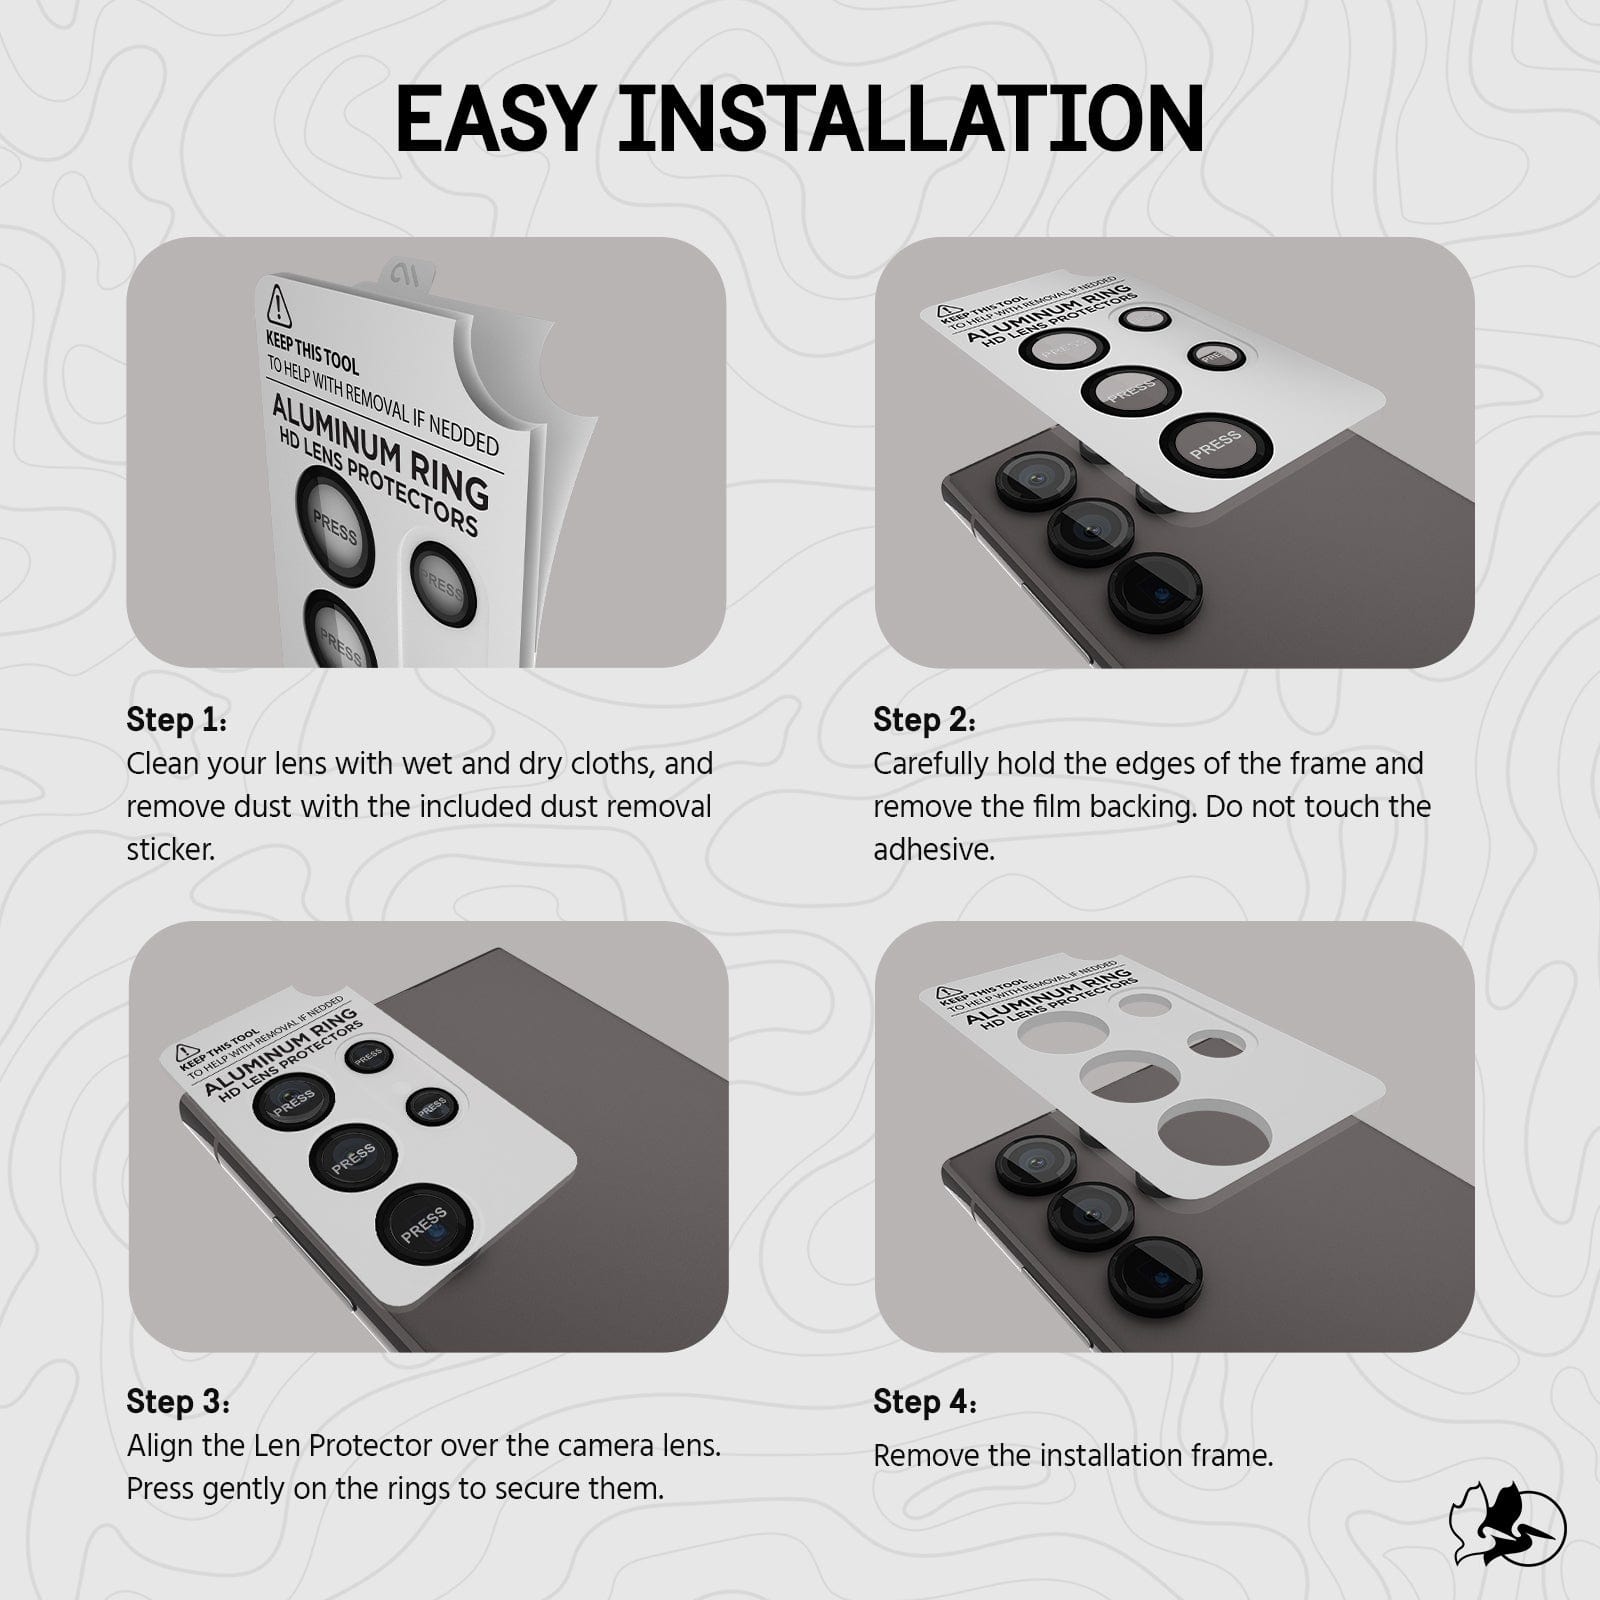 EASY INSTALLATION. STEP BY STEP INSTRUCTION